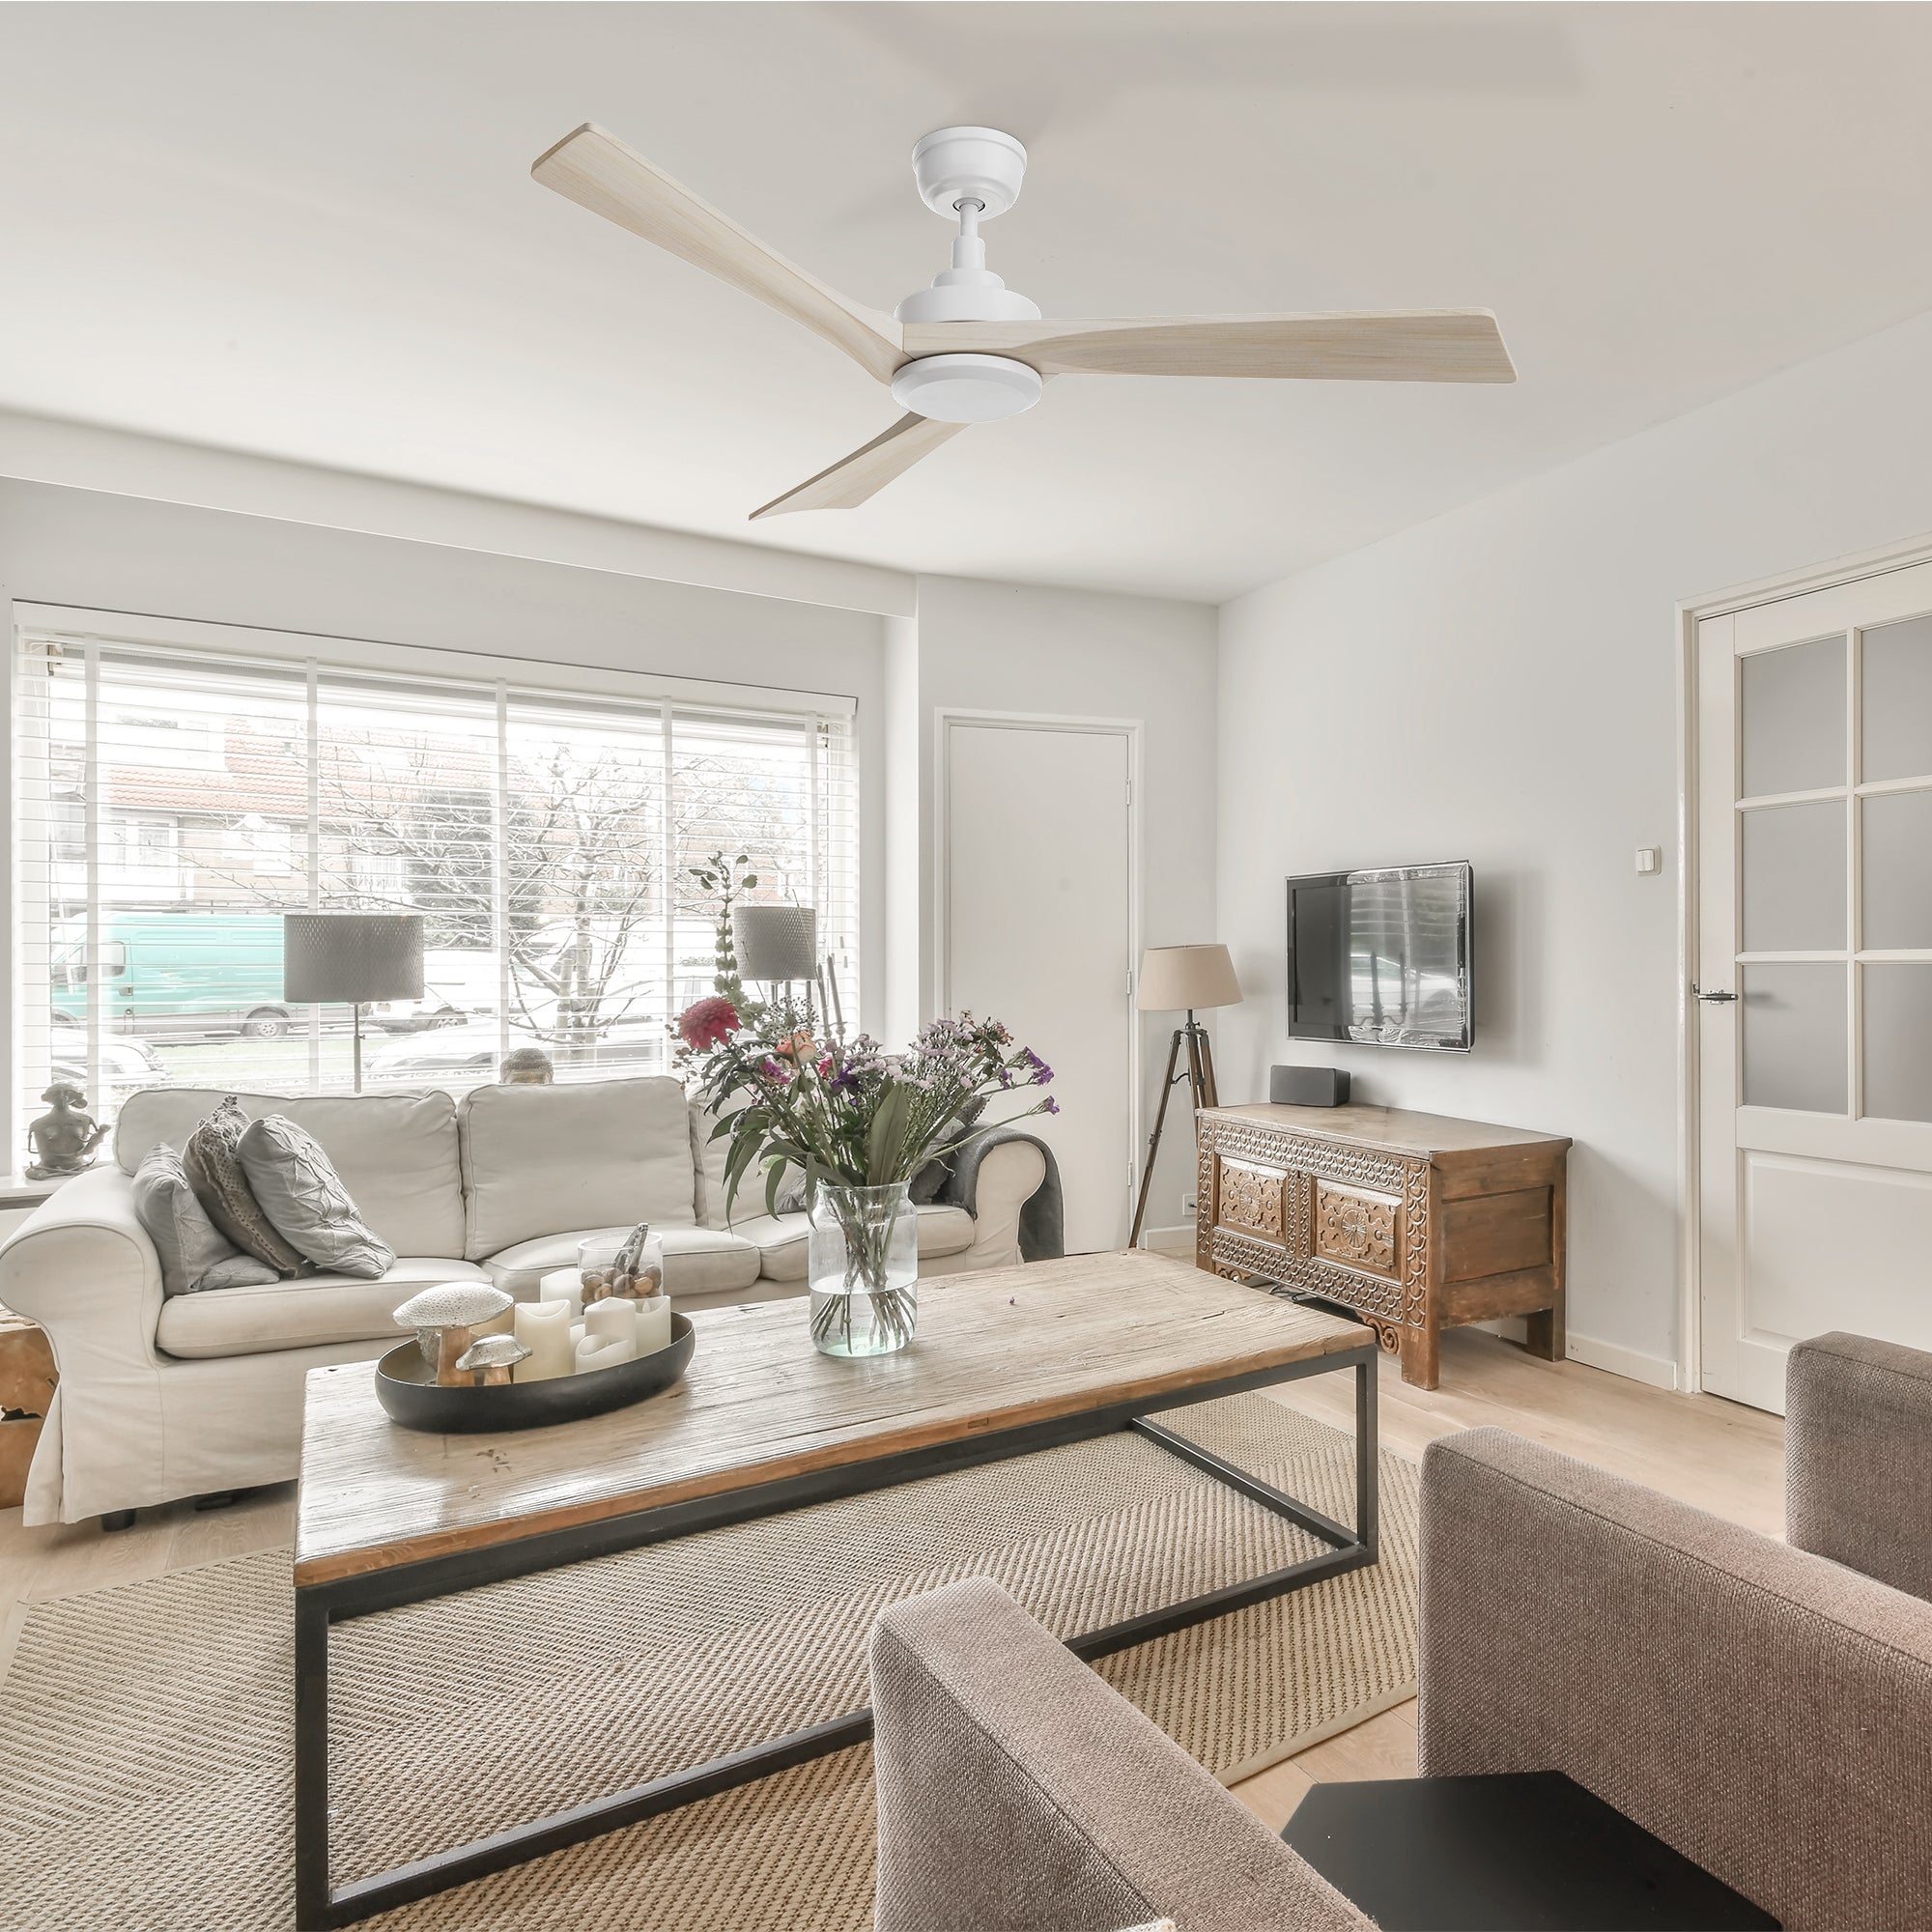 52in Ceiling Fan with Reversible DC motor, Solid Wood blades, and whisper-quiet operation. Perfect for modern living rooms. 